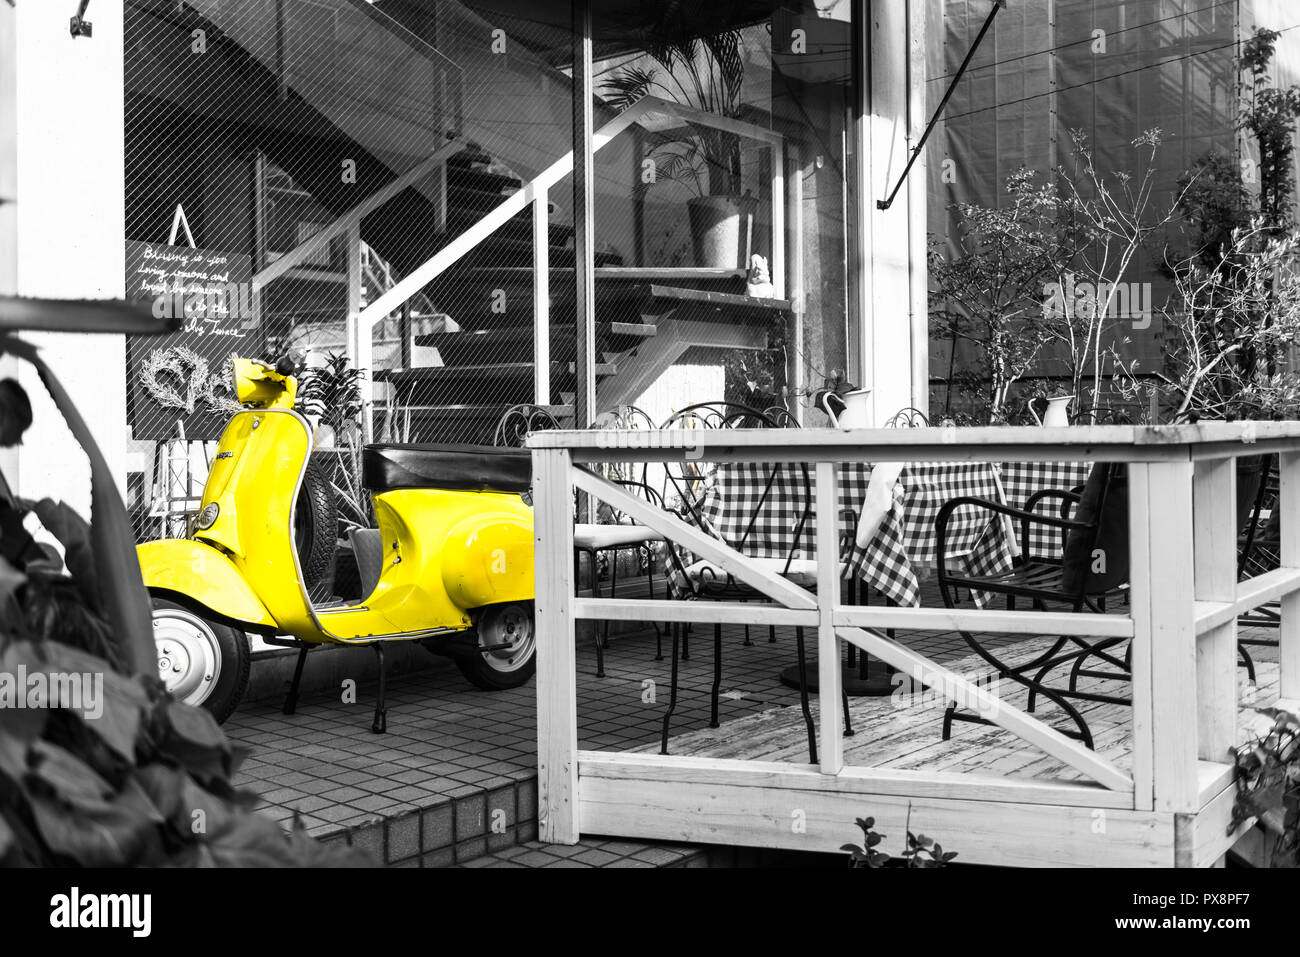 Yellow Vespa scooter at monochrome cafe Stock Photo